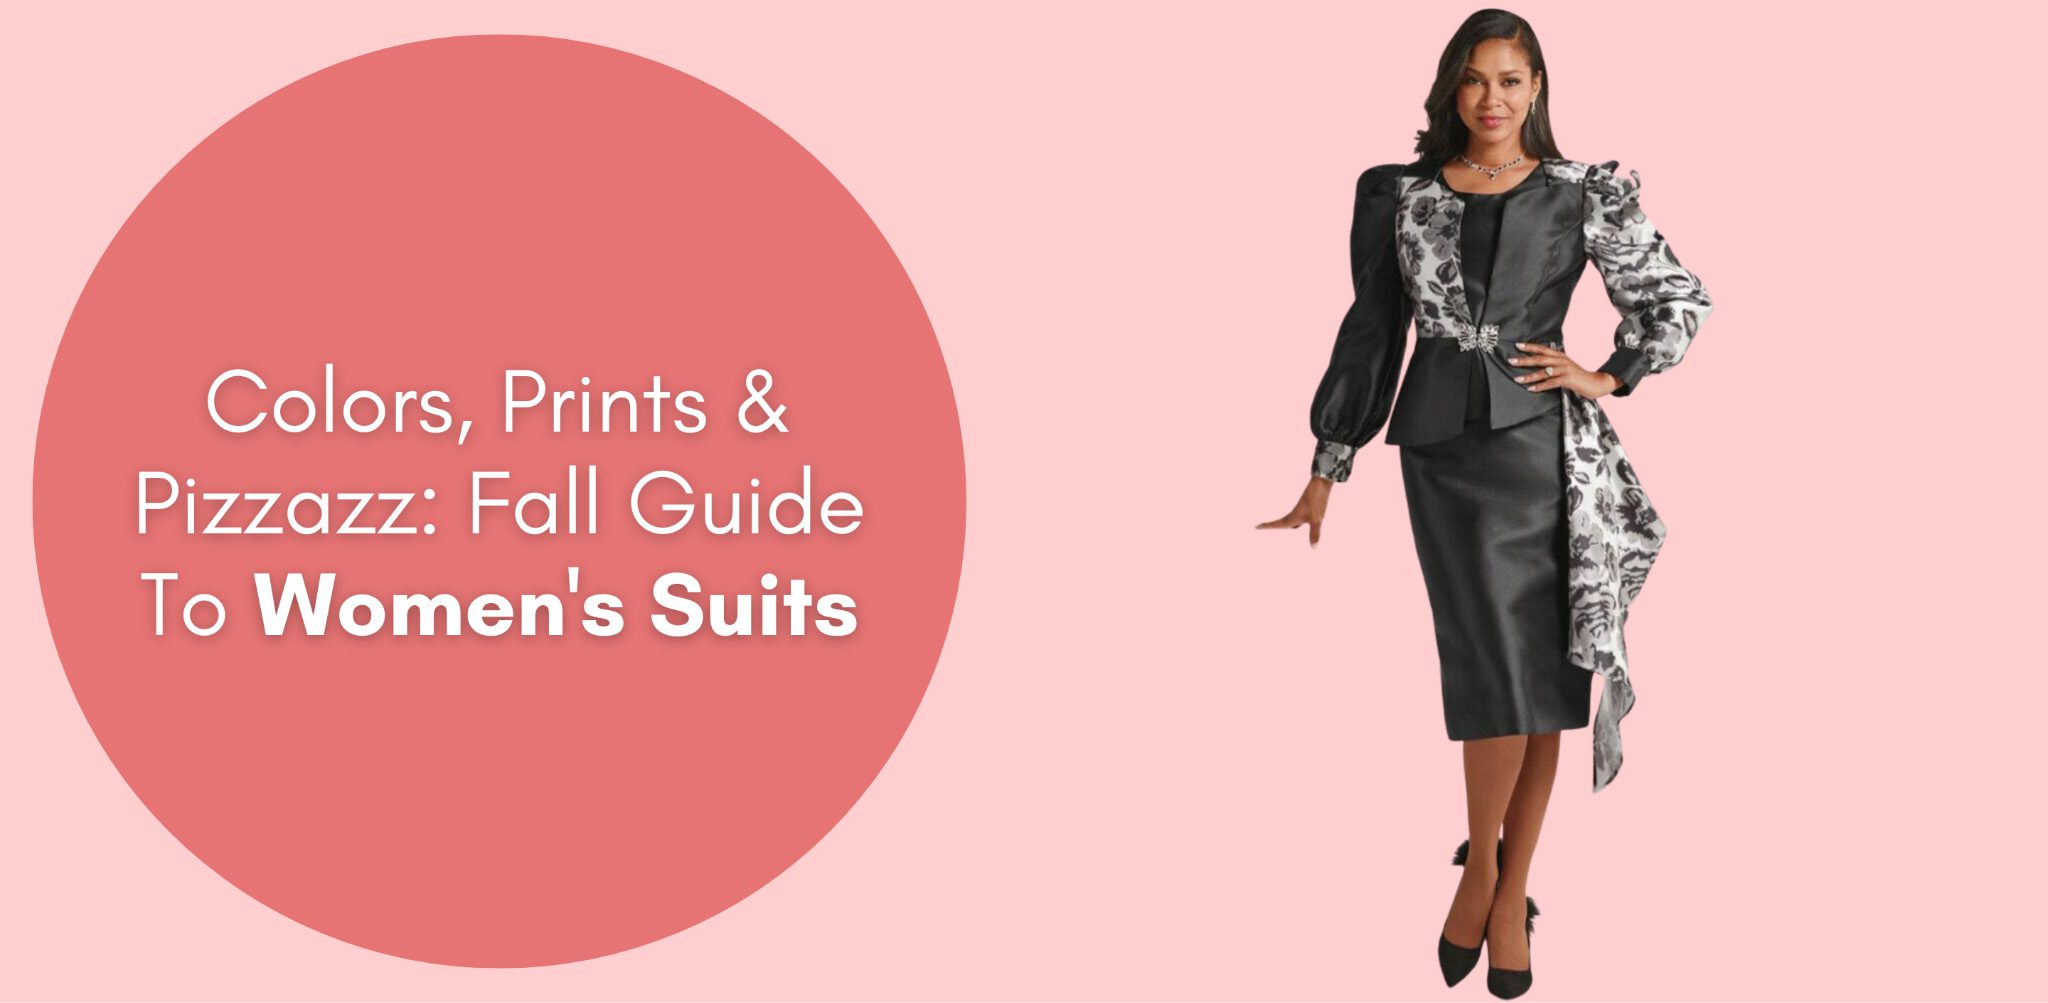 Guide to Women's Suits